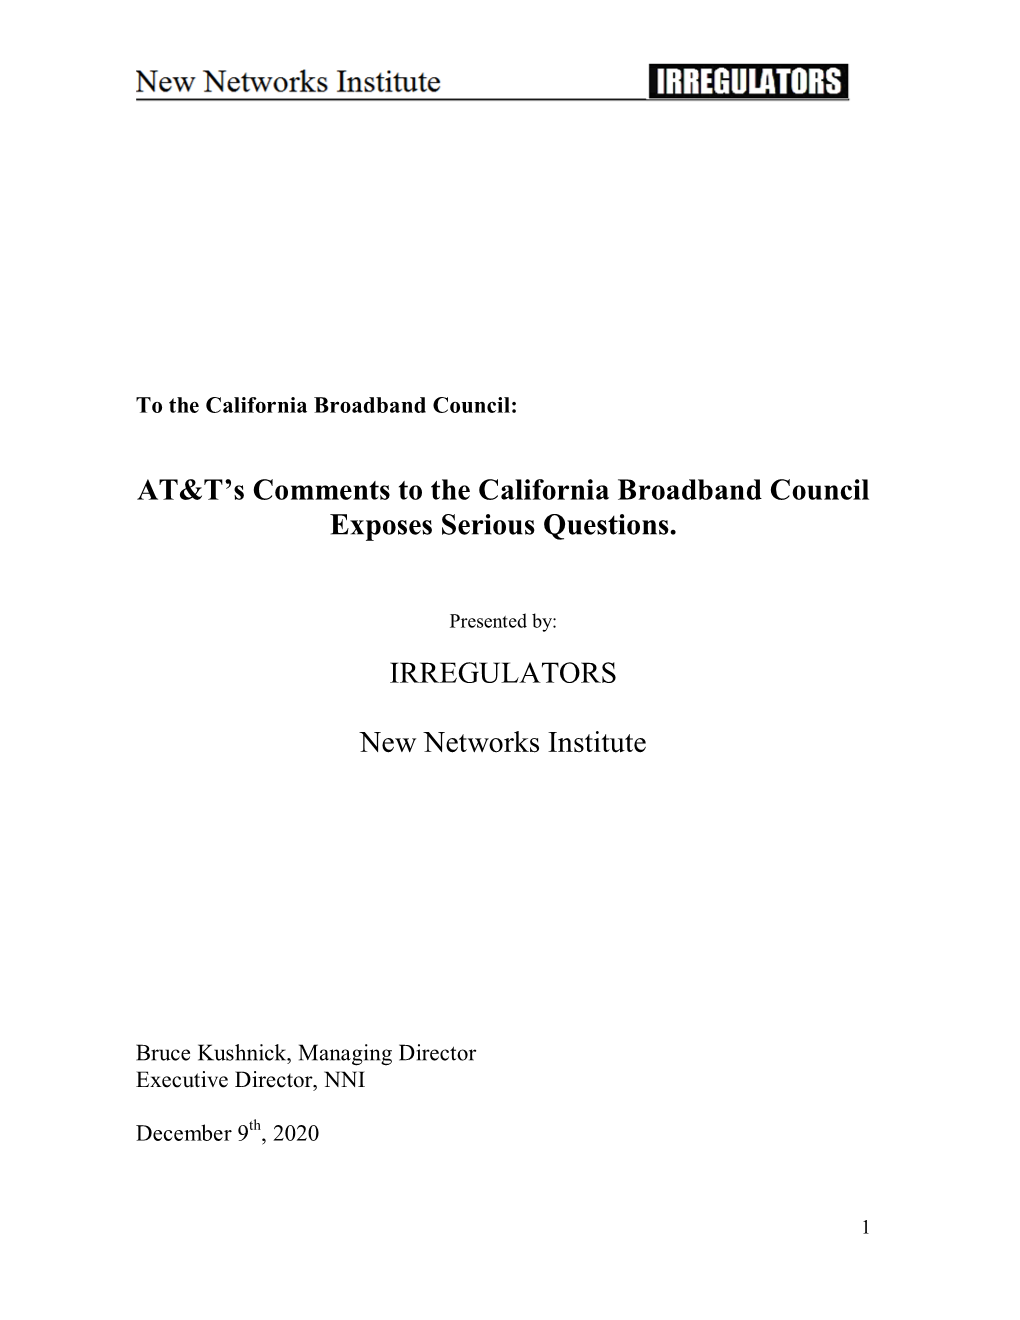 AT&T's Comments to the California Broadband Council Exposes